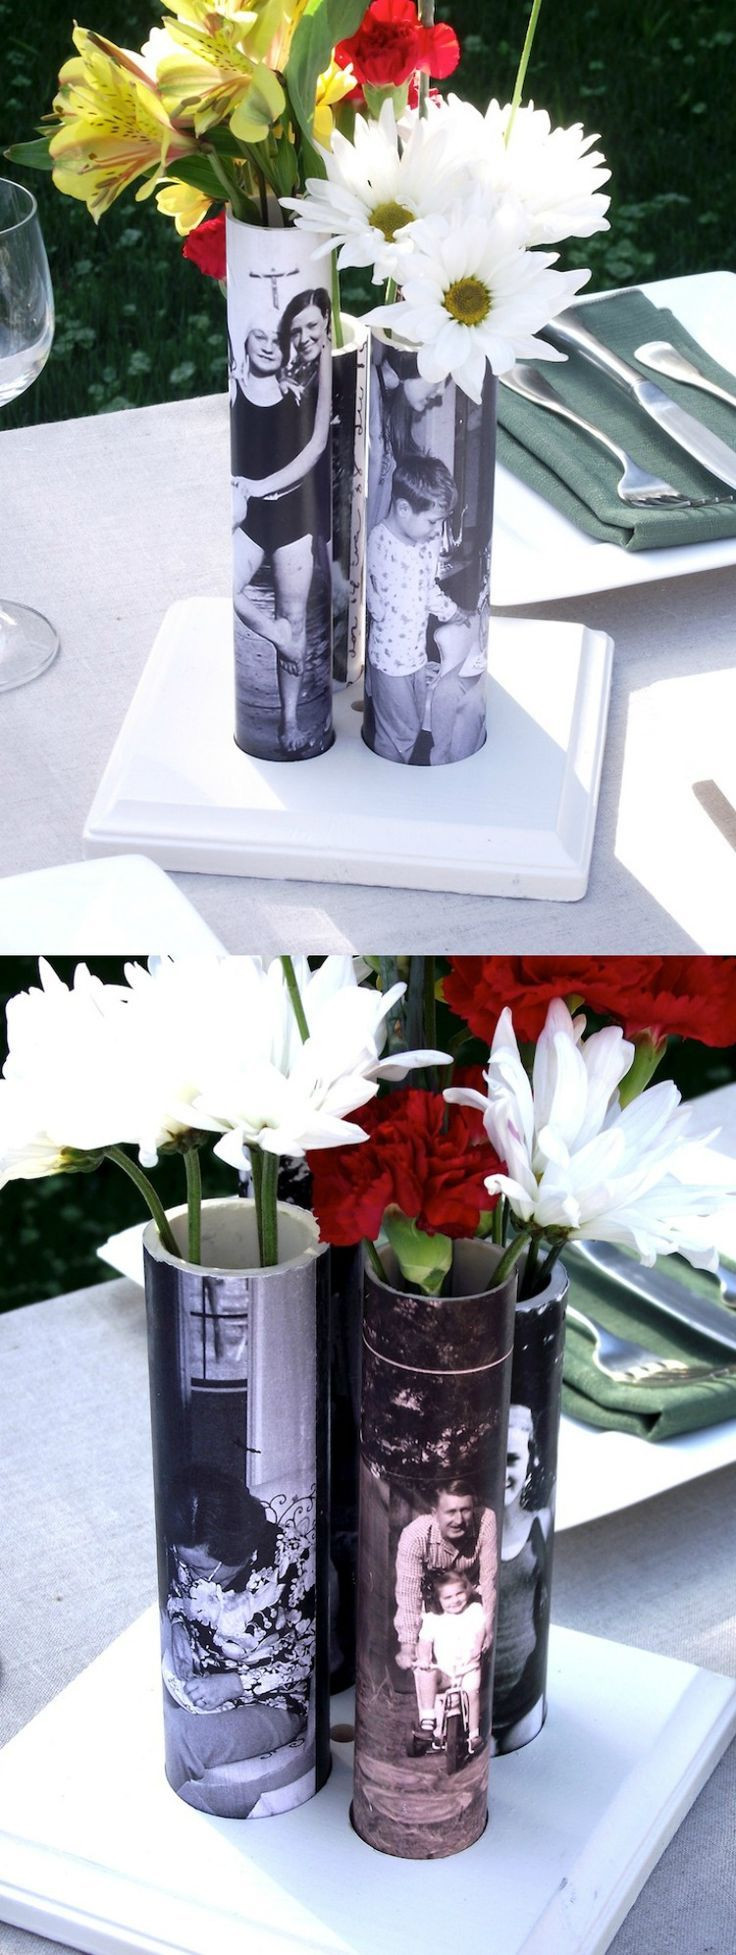 29 Great Personalized Flower Vase Photo 2024 free download personalized flower vase photo of mothers day photo vases from pvc pipe pvc pipe pipes and craft regarding you wont believe this genius mothers day craft idea david makes a diy vase out of p